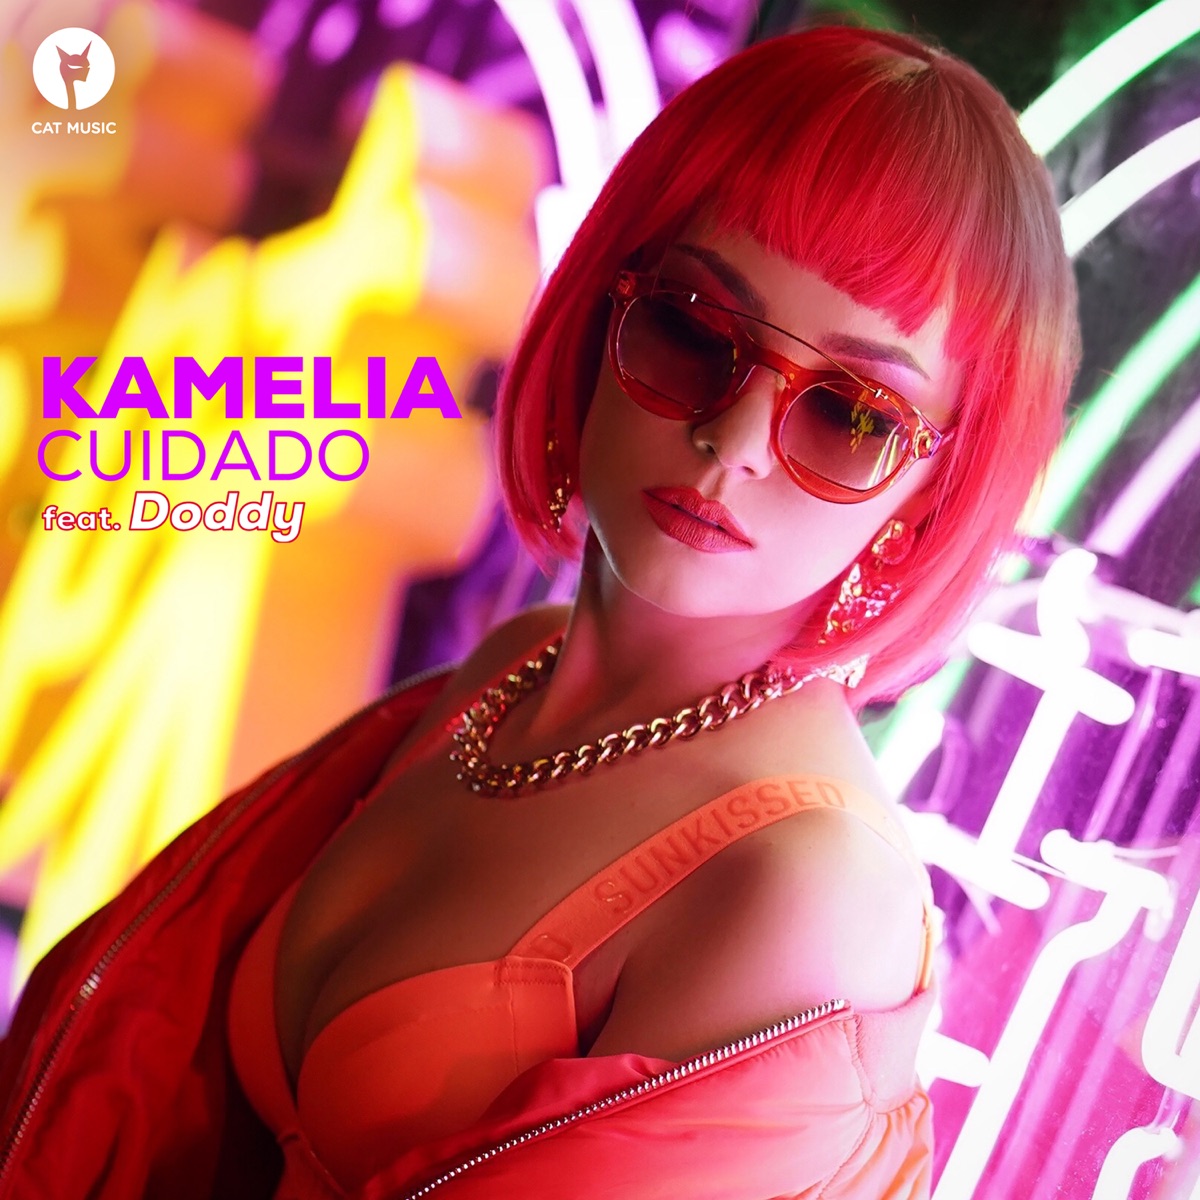 Cover Songs by Kamelia on Apple Music